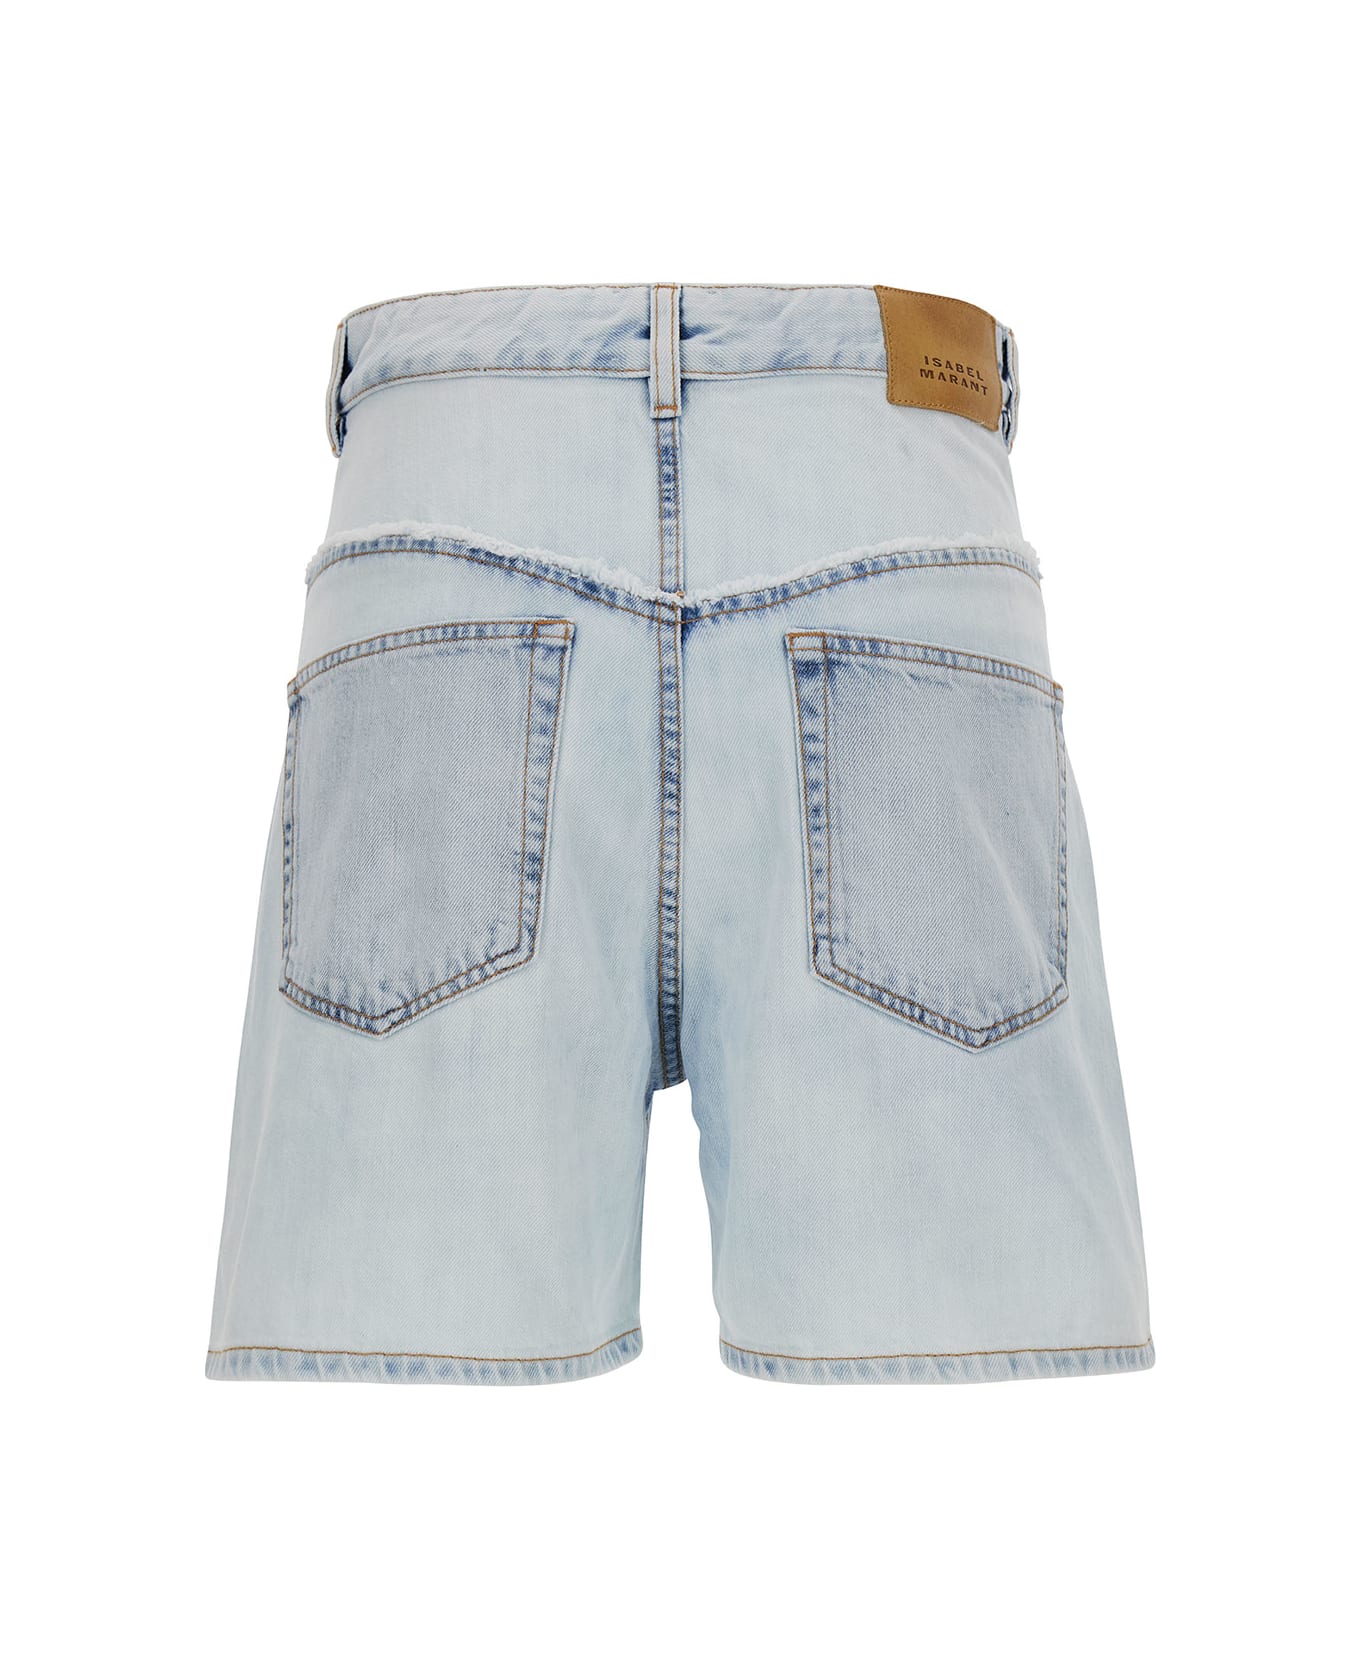 Isabel Marant Light Blue Shorts With Patch Logo And Contrasting Details In Cotton Denim Woman - Light blue